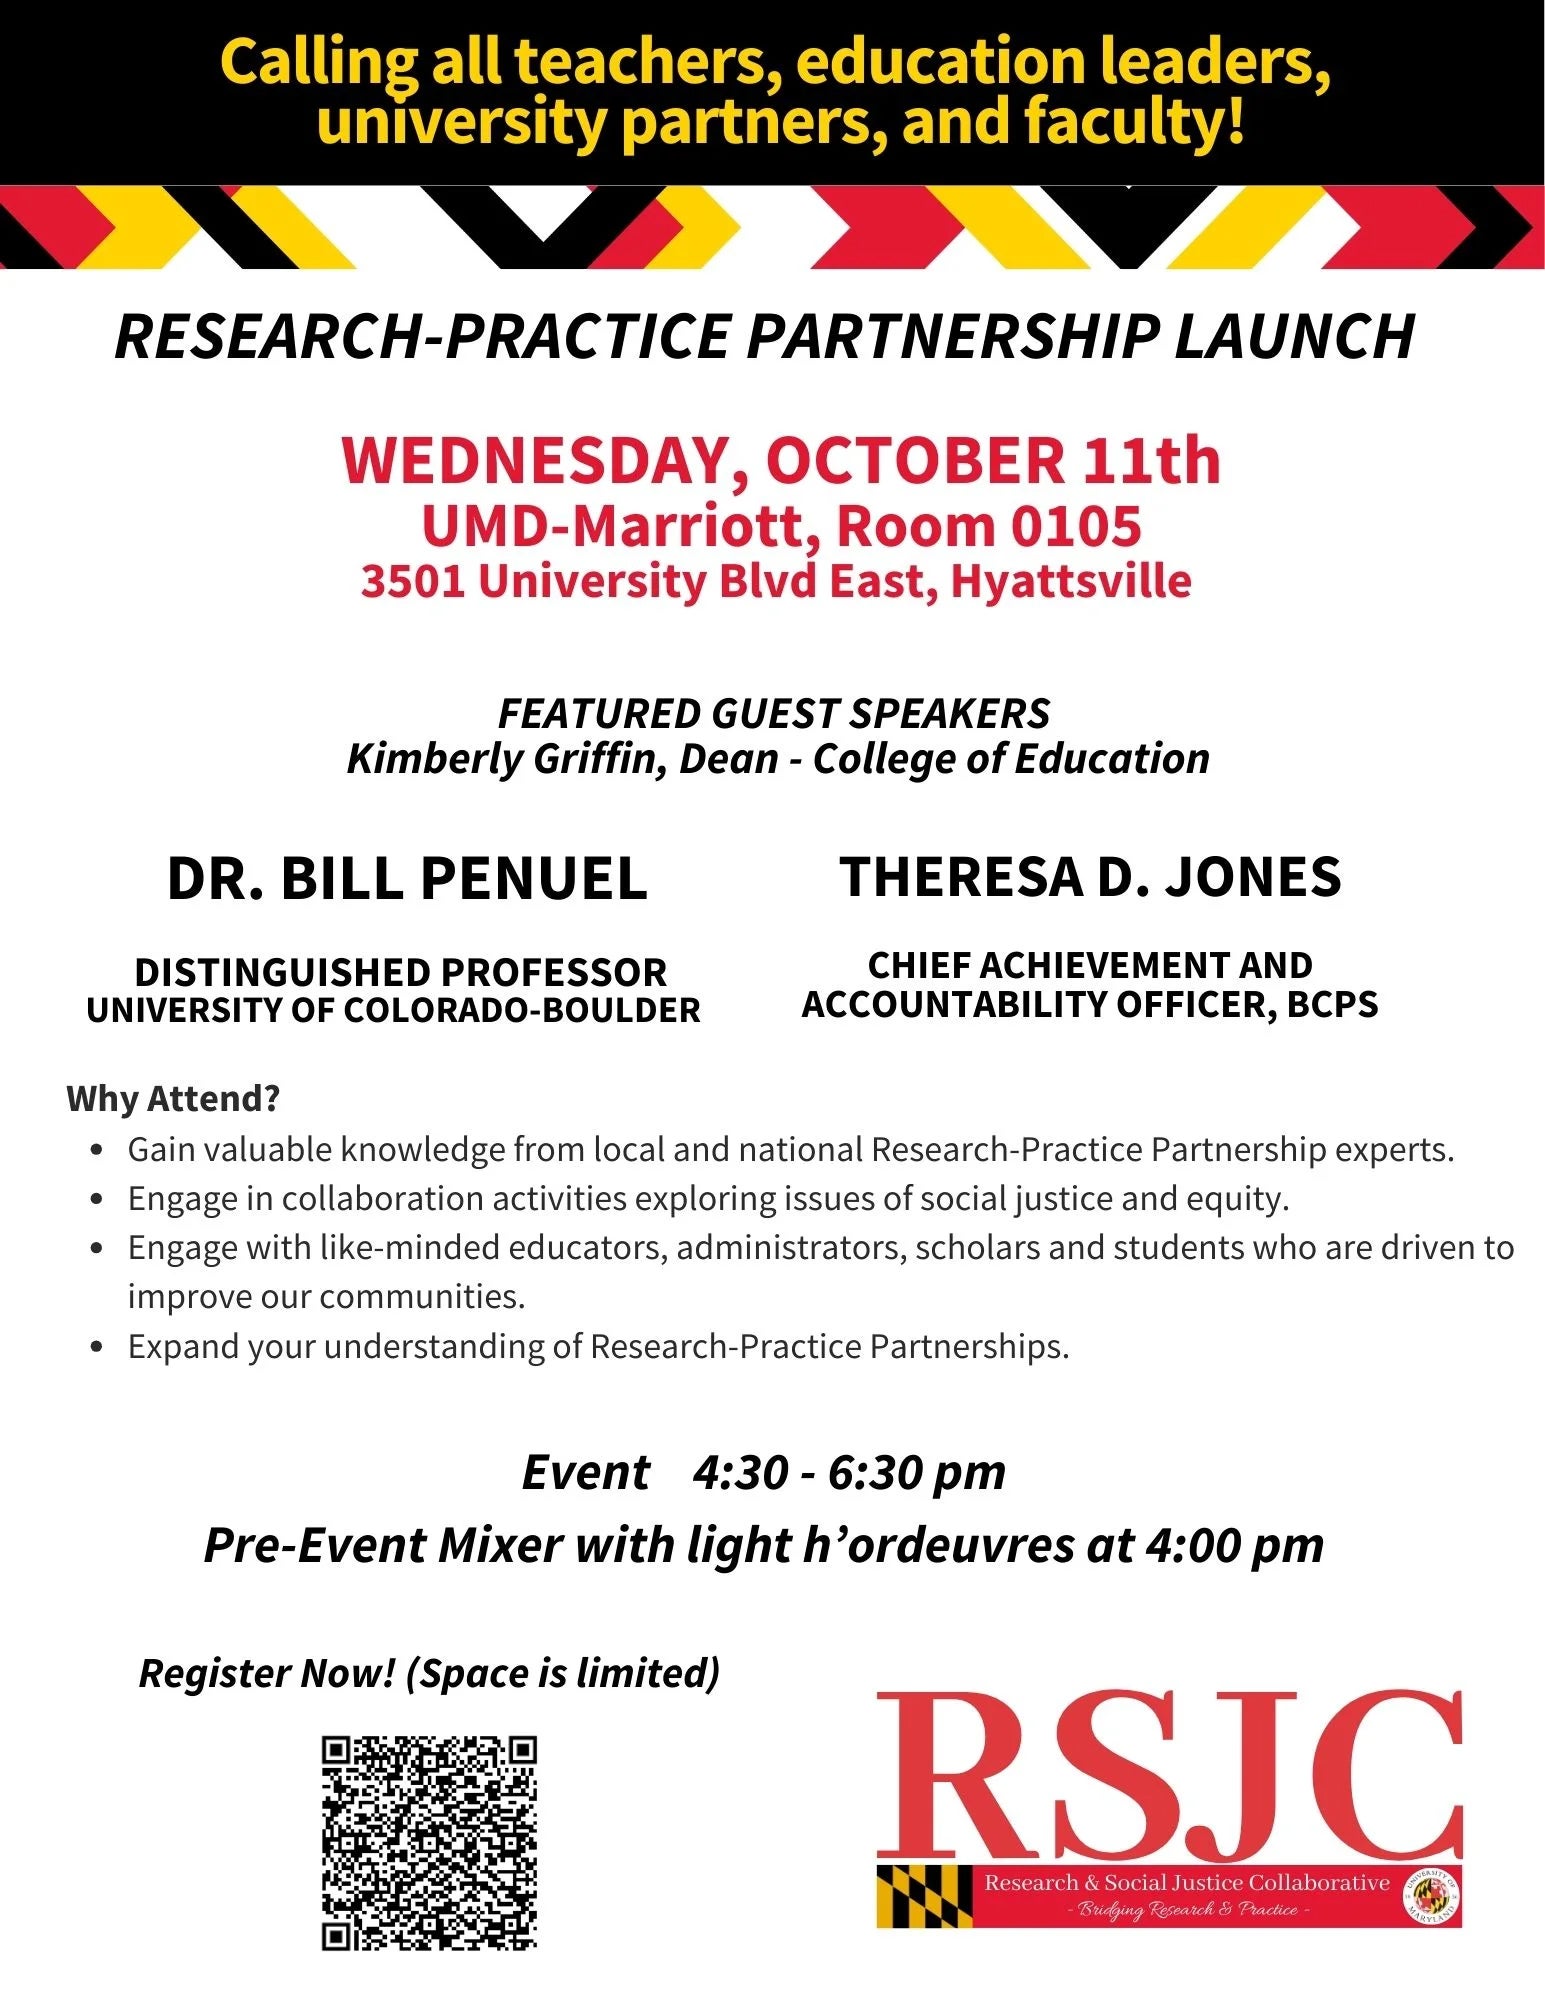 Research-Practice Partnership Launch Flyer